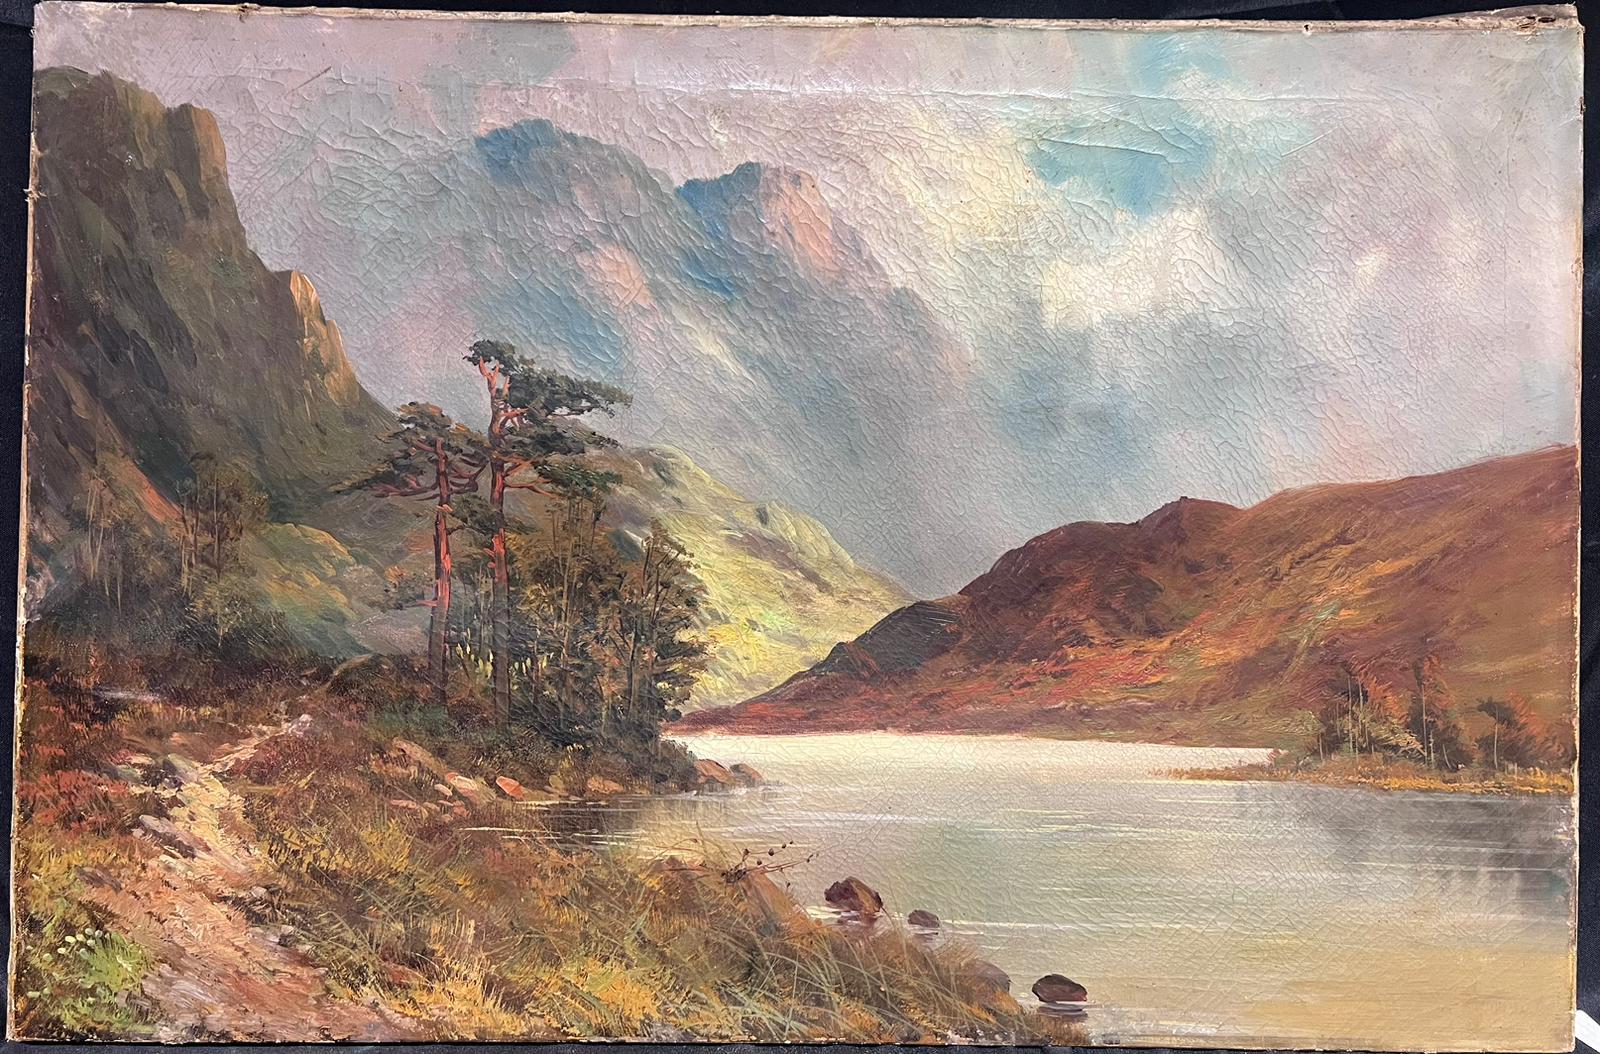 The Highland Waters
by F. E. Jamieson (British 1895-1950)
oil painting on canvas, unframed
canvas : 20 x 30 inches
provenance: private collection, UK
condition: very good and sound condition 
